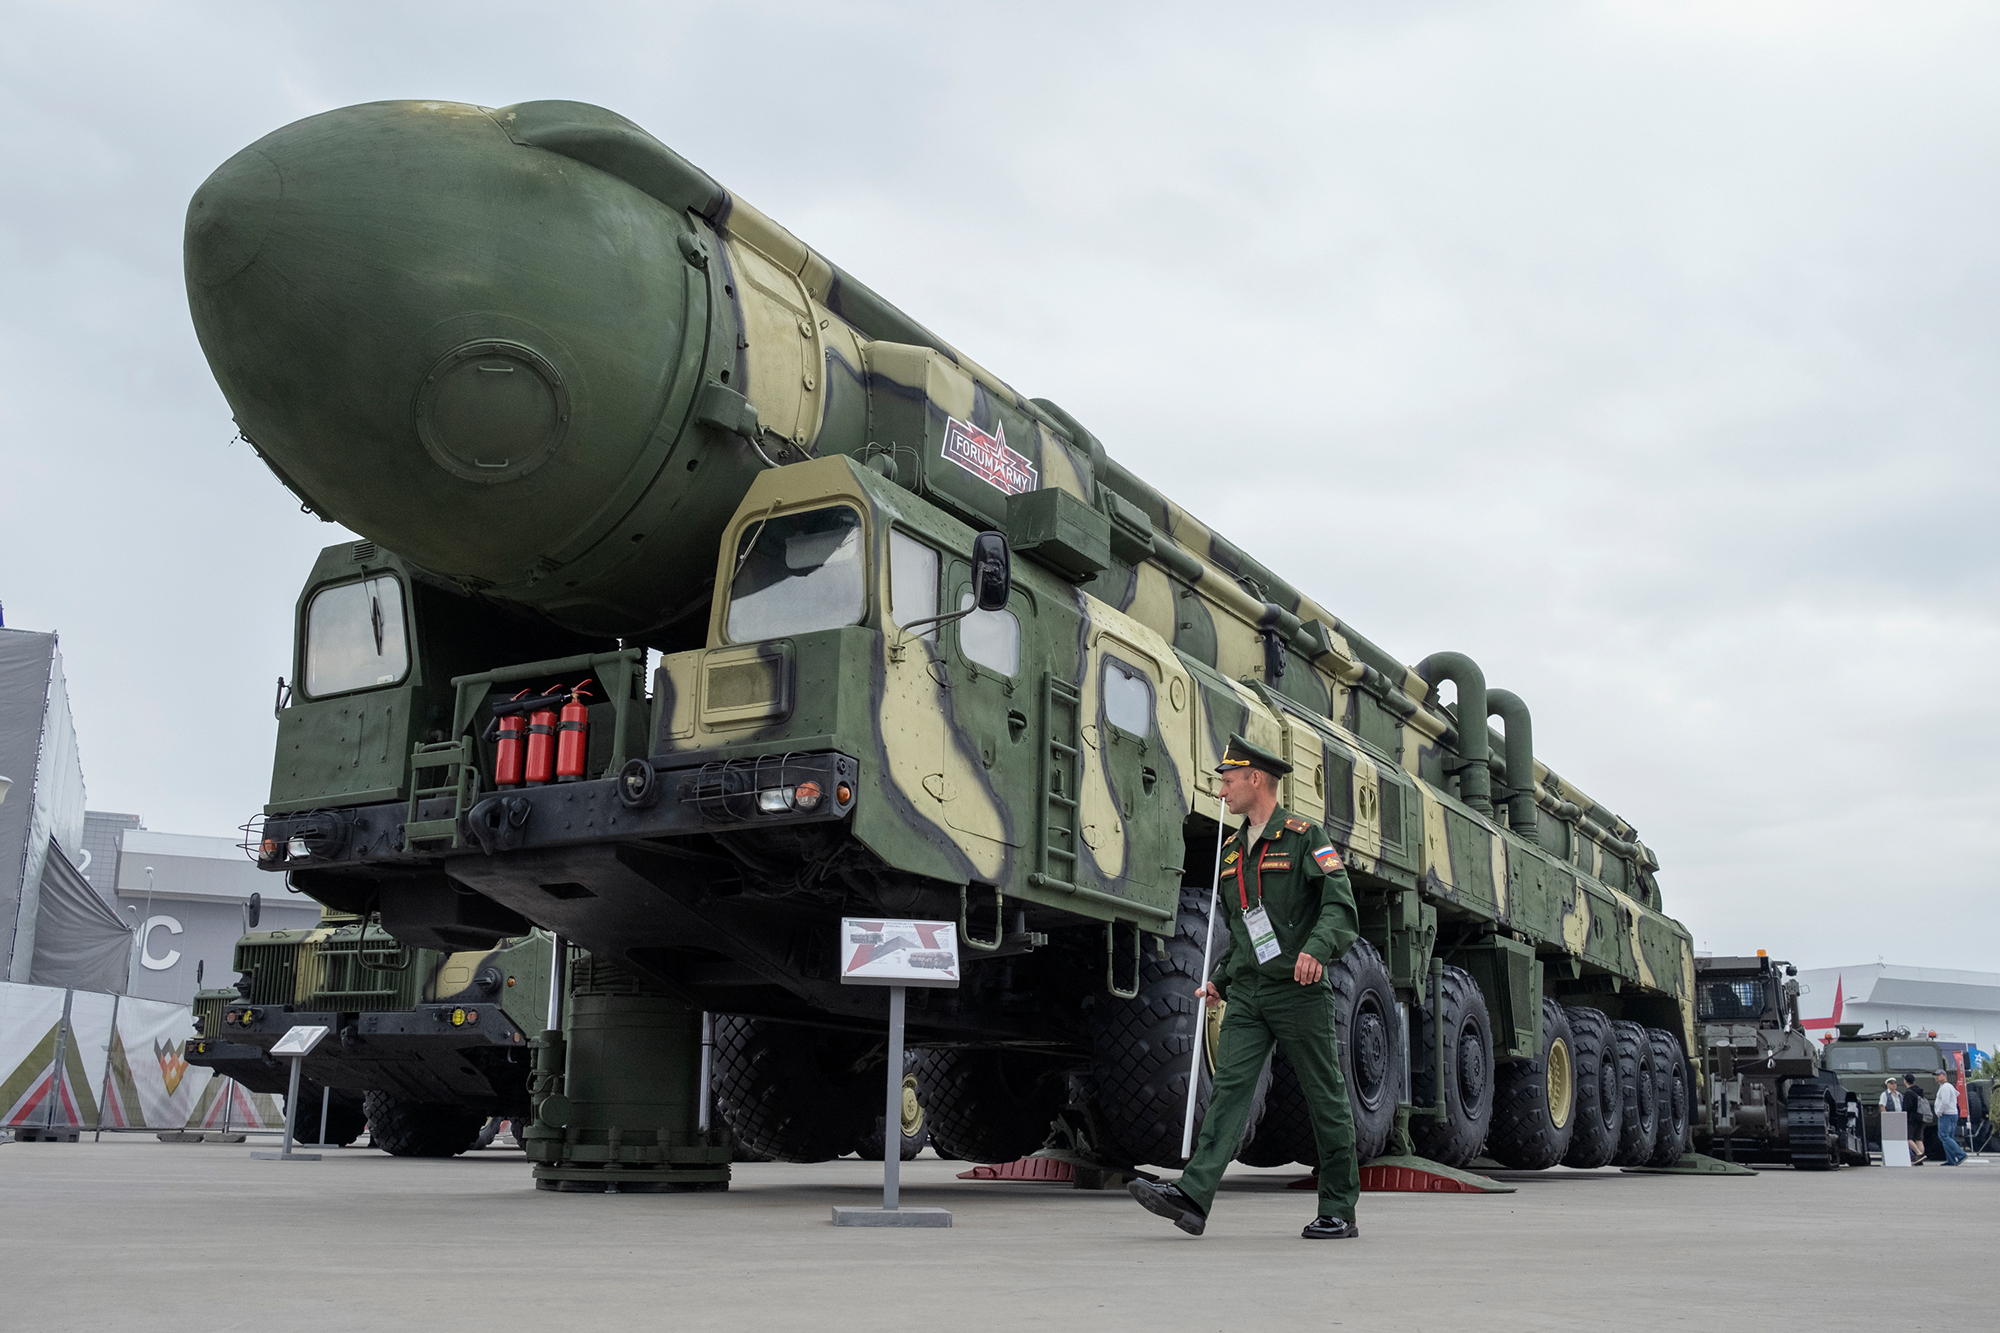 The RT-2PM2, Topol-M, one of the most recent intercontinental ballistic missiles to be deployed by Russia, is seen at the Russian international military expo Army Expo 2022 at Patriot park in Moscow on August 20, 2022. 